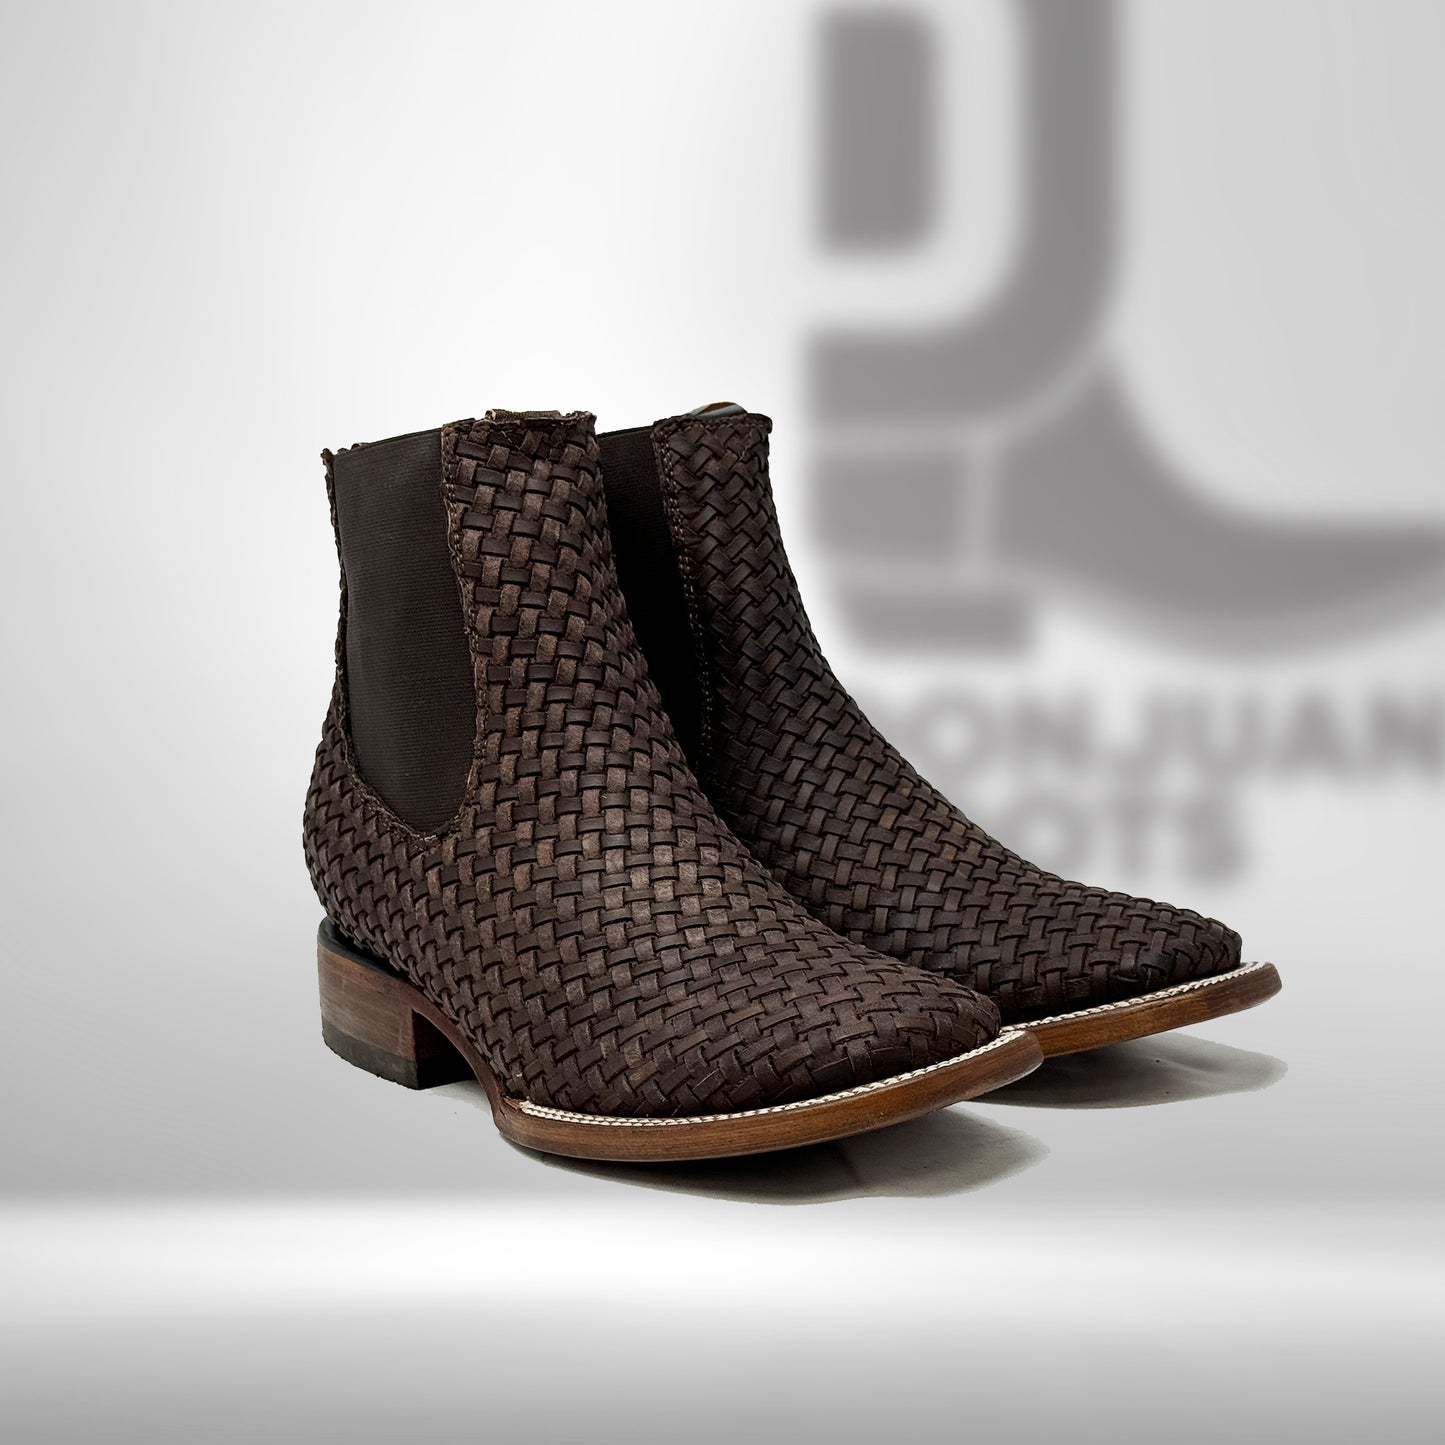 Brown Basket Weave Chelsea Boots H Toe